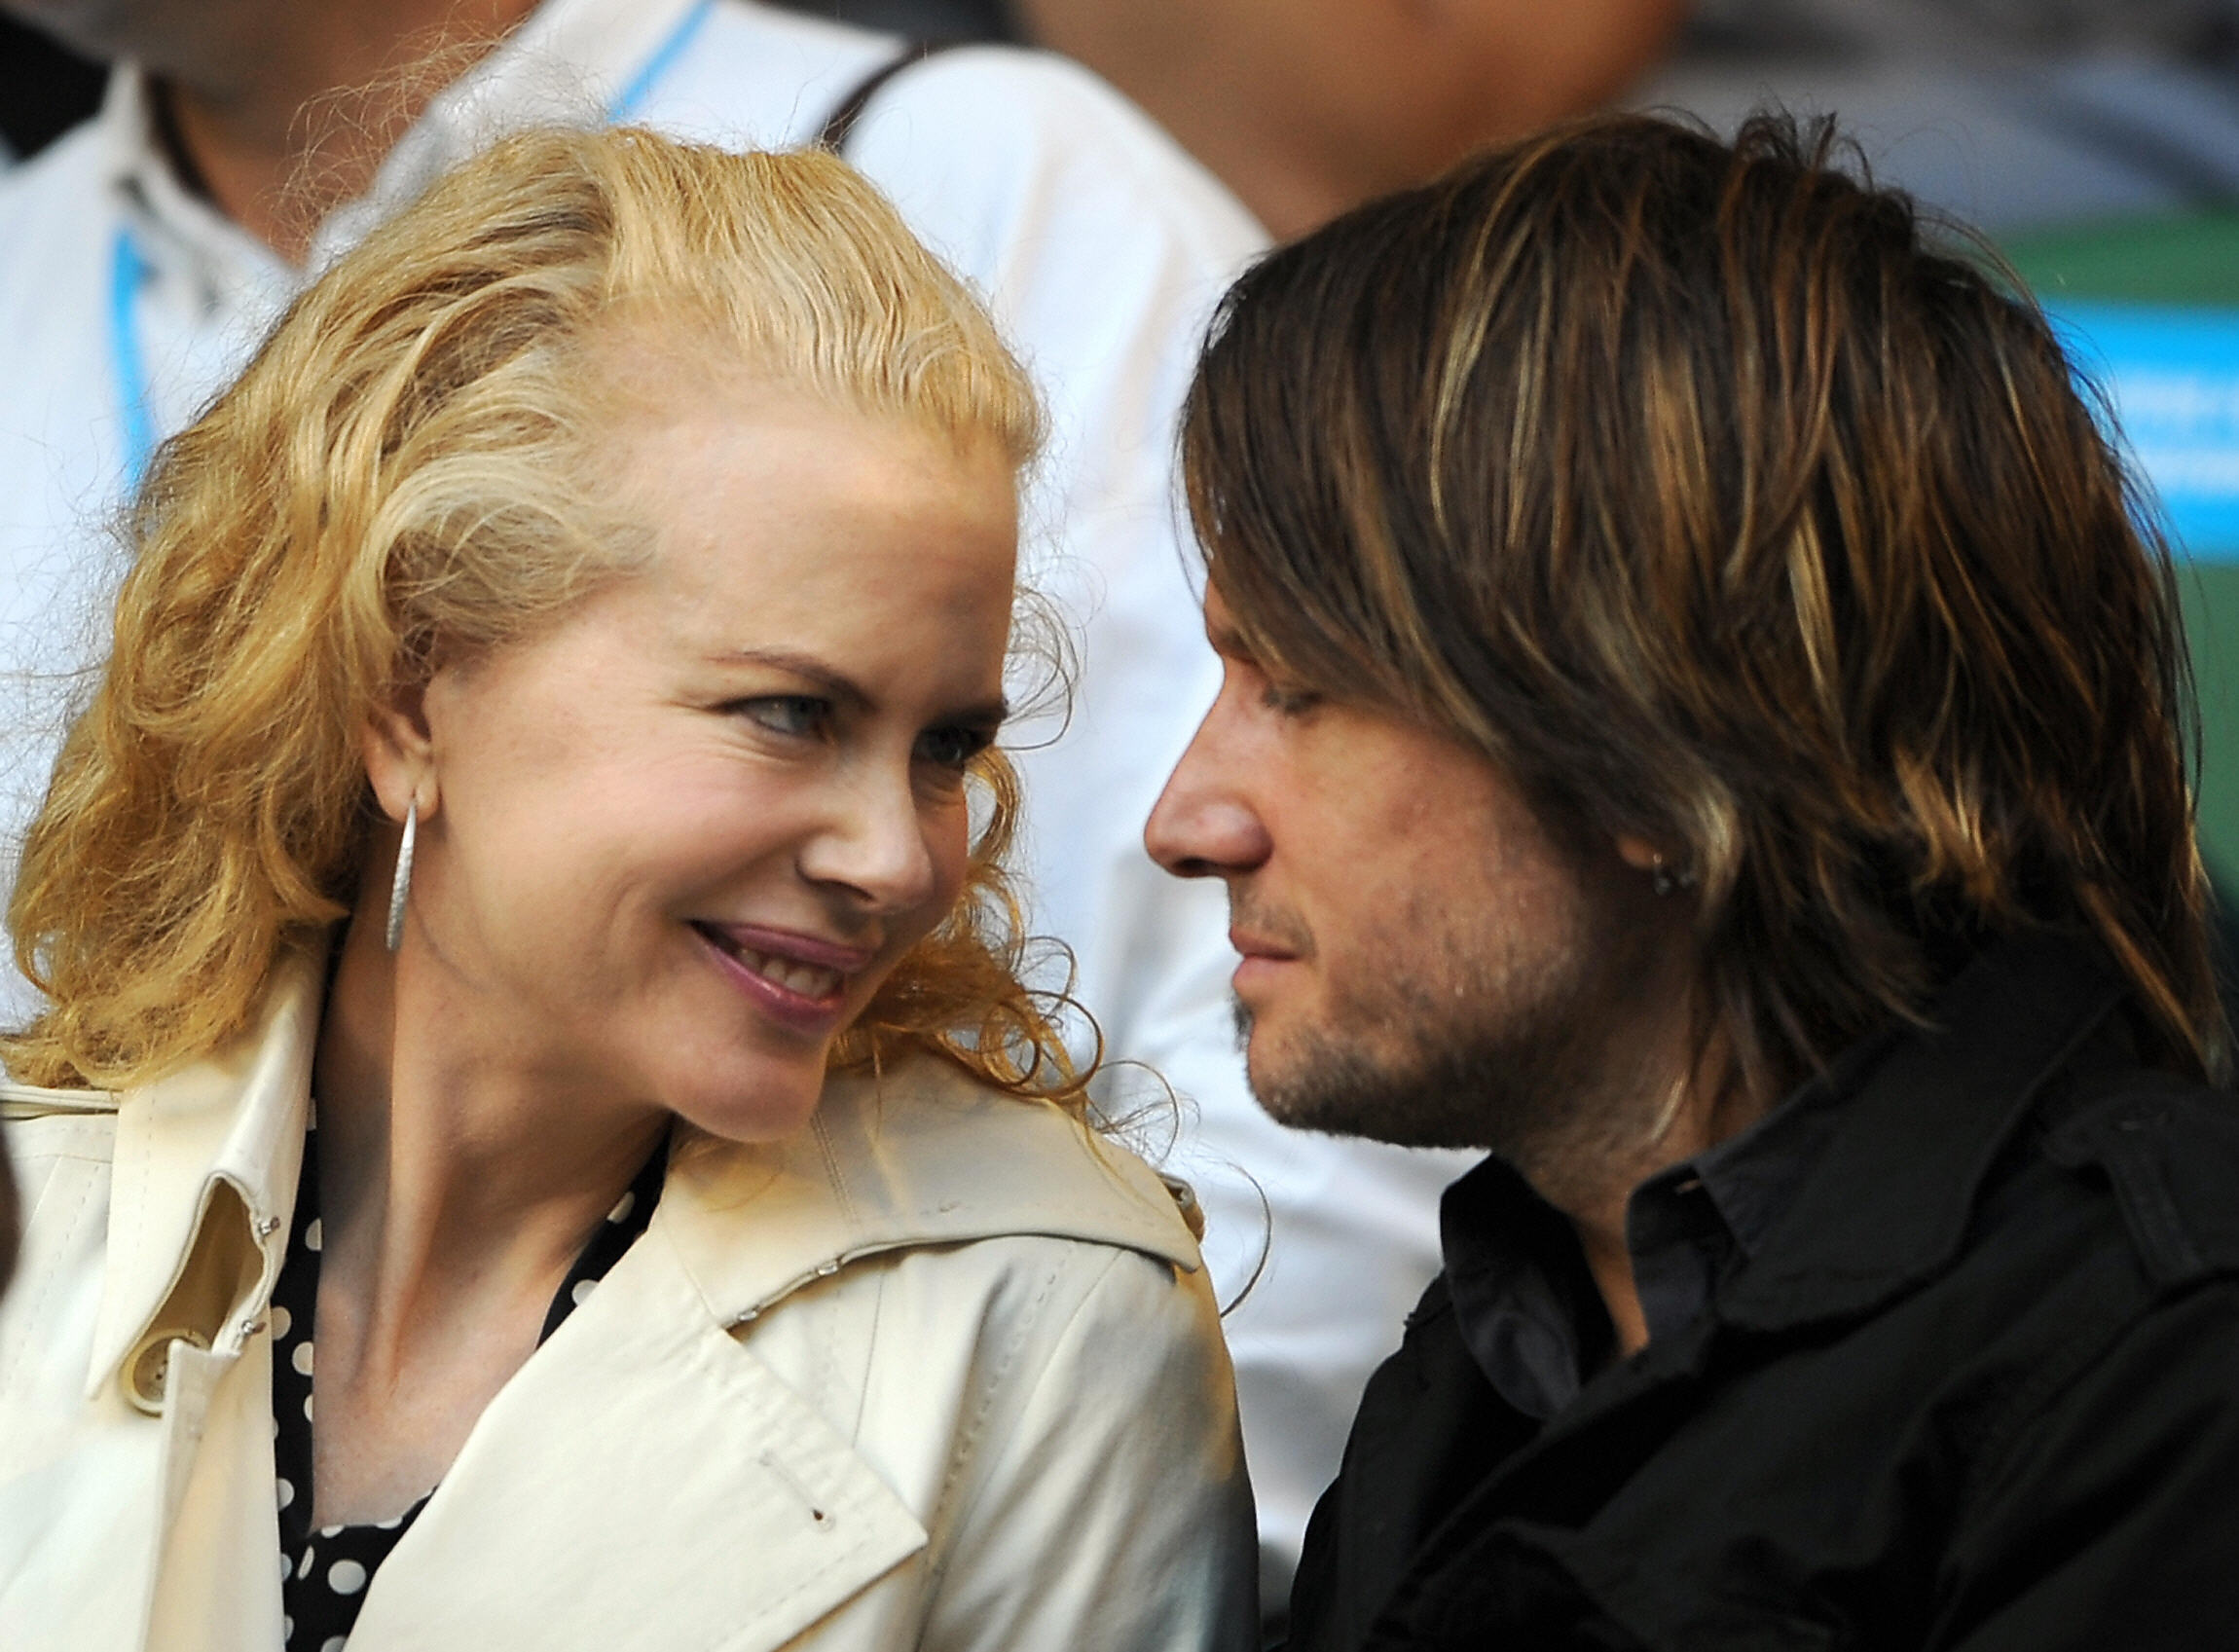 Nicole Kidman and Keith Urban at the men's singles fourth round match at the Australian Open tennis tournament in Melbourne on January 21, 2008 | Source: Getty Images